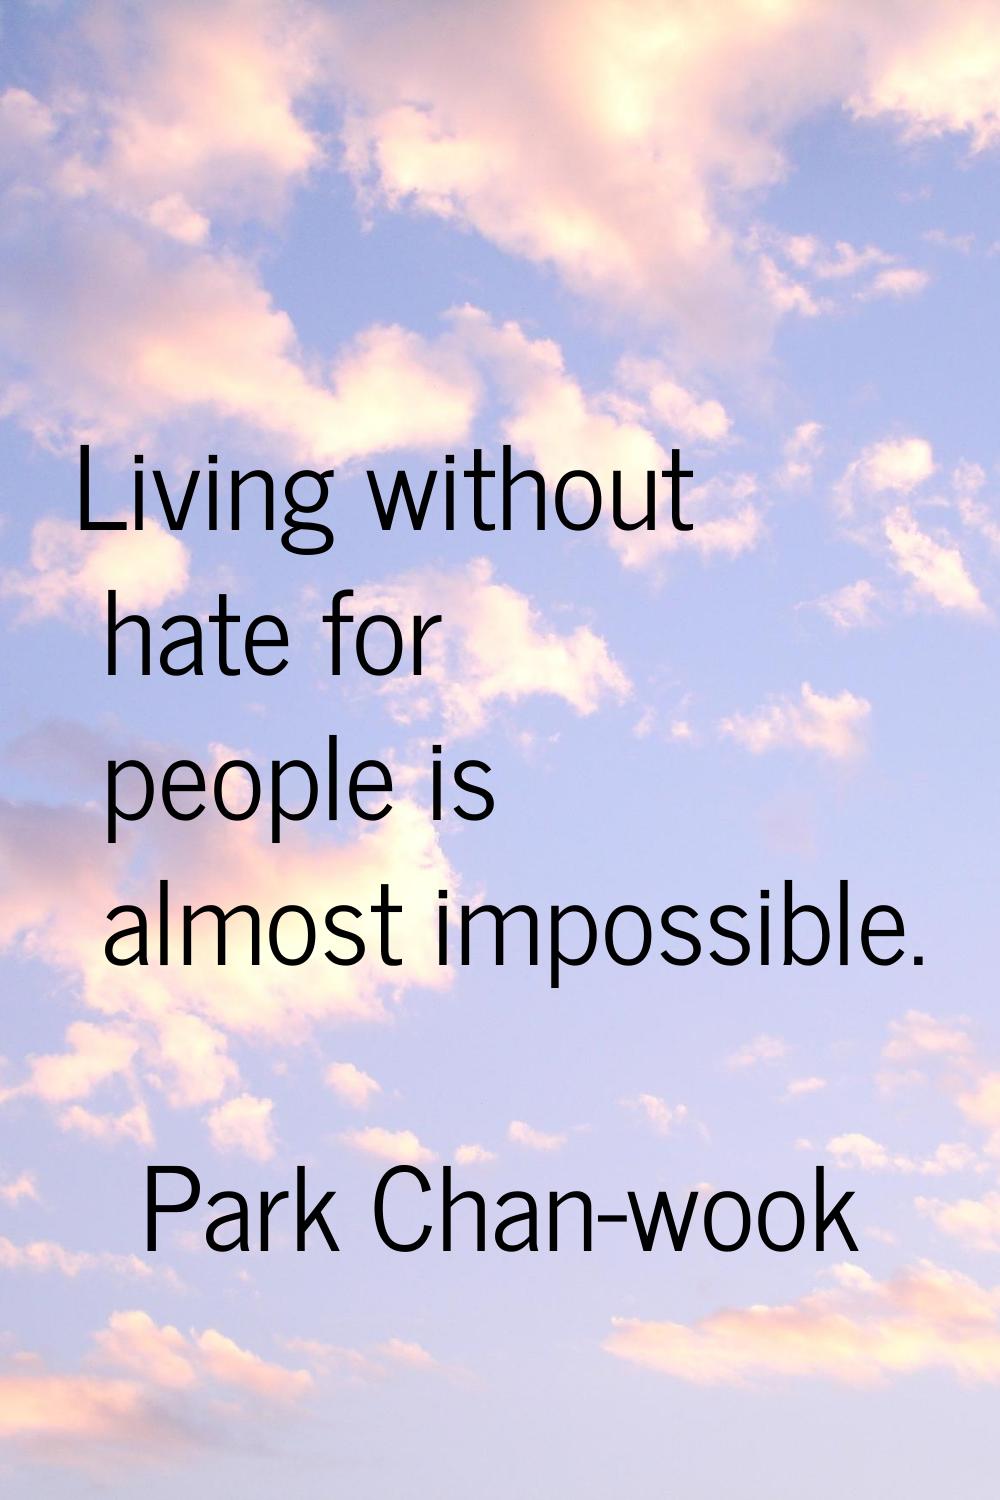 Living without hate for people is almost impossible.